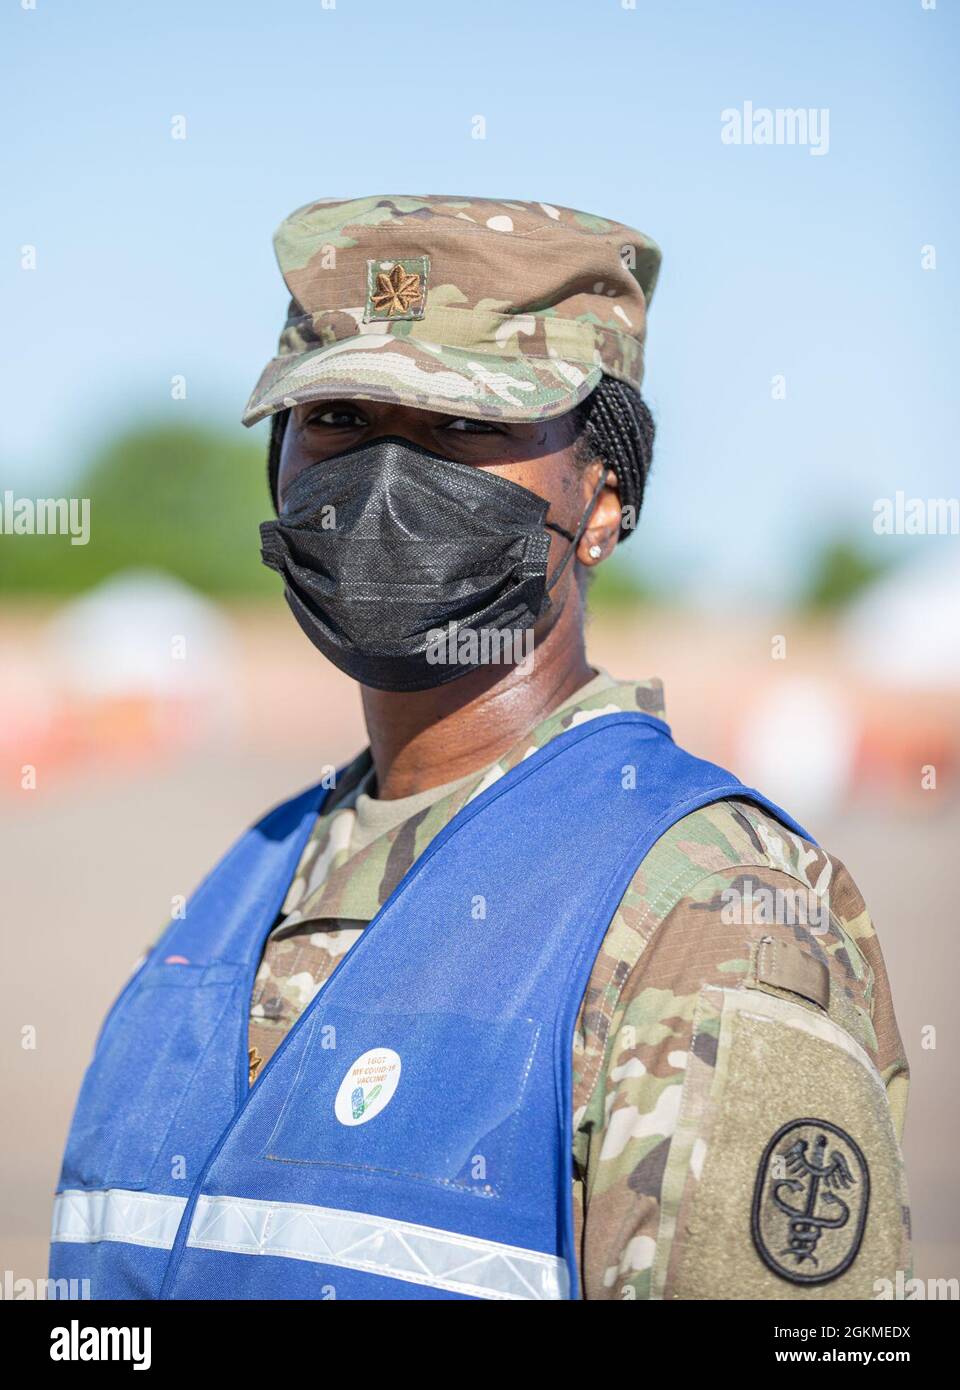 U.S. Army Maj. Tonda Williams, a registered nurse assigned to Brooks Army Medical Center, stands for a portrait photo in Pueblo, Colorado, May 27, 2021. The Soldiers continue to vaccinate members of the Pueblo community and surrounding areas as part of the federal vaccination response mission. U.S. Northern Command, through U.S. Army North, remains committed to providing continued, flexible Department of Defense support to the Federal Emergency Management Agency as part of the whole-of-government response to COVID-19. Stock Photo